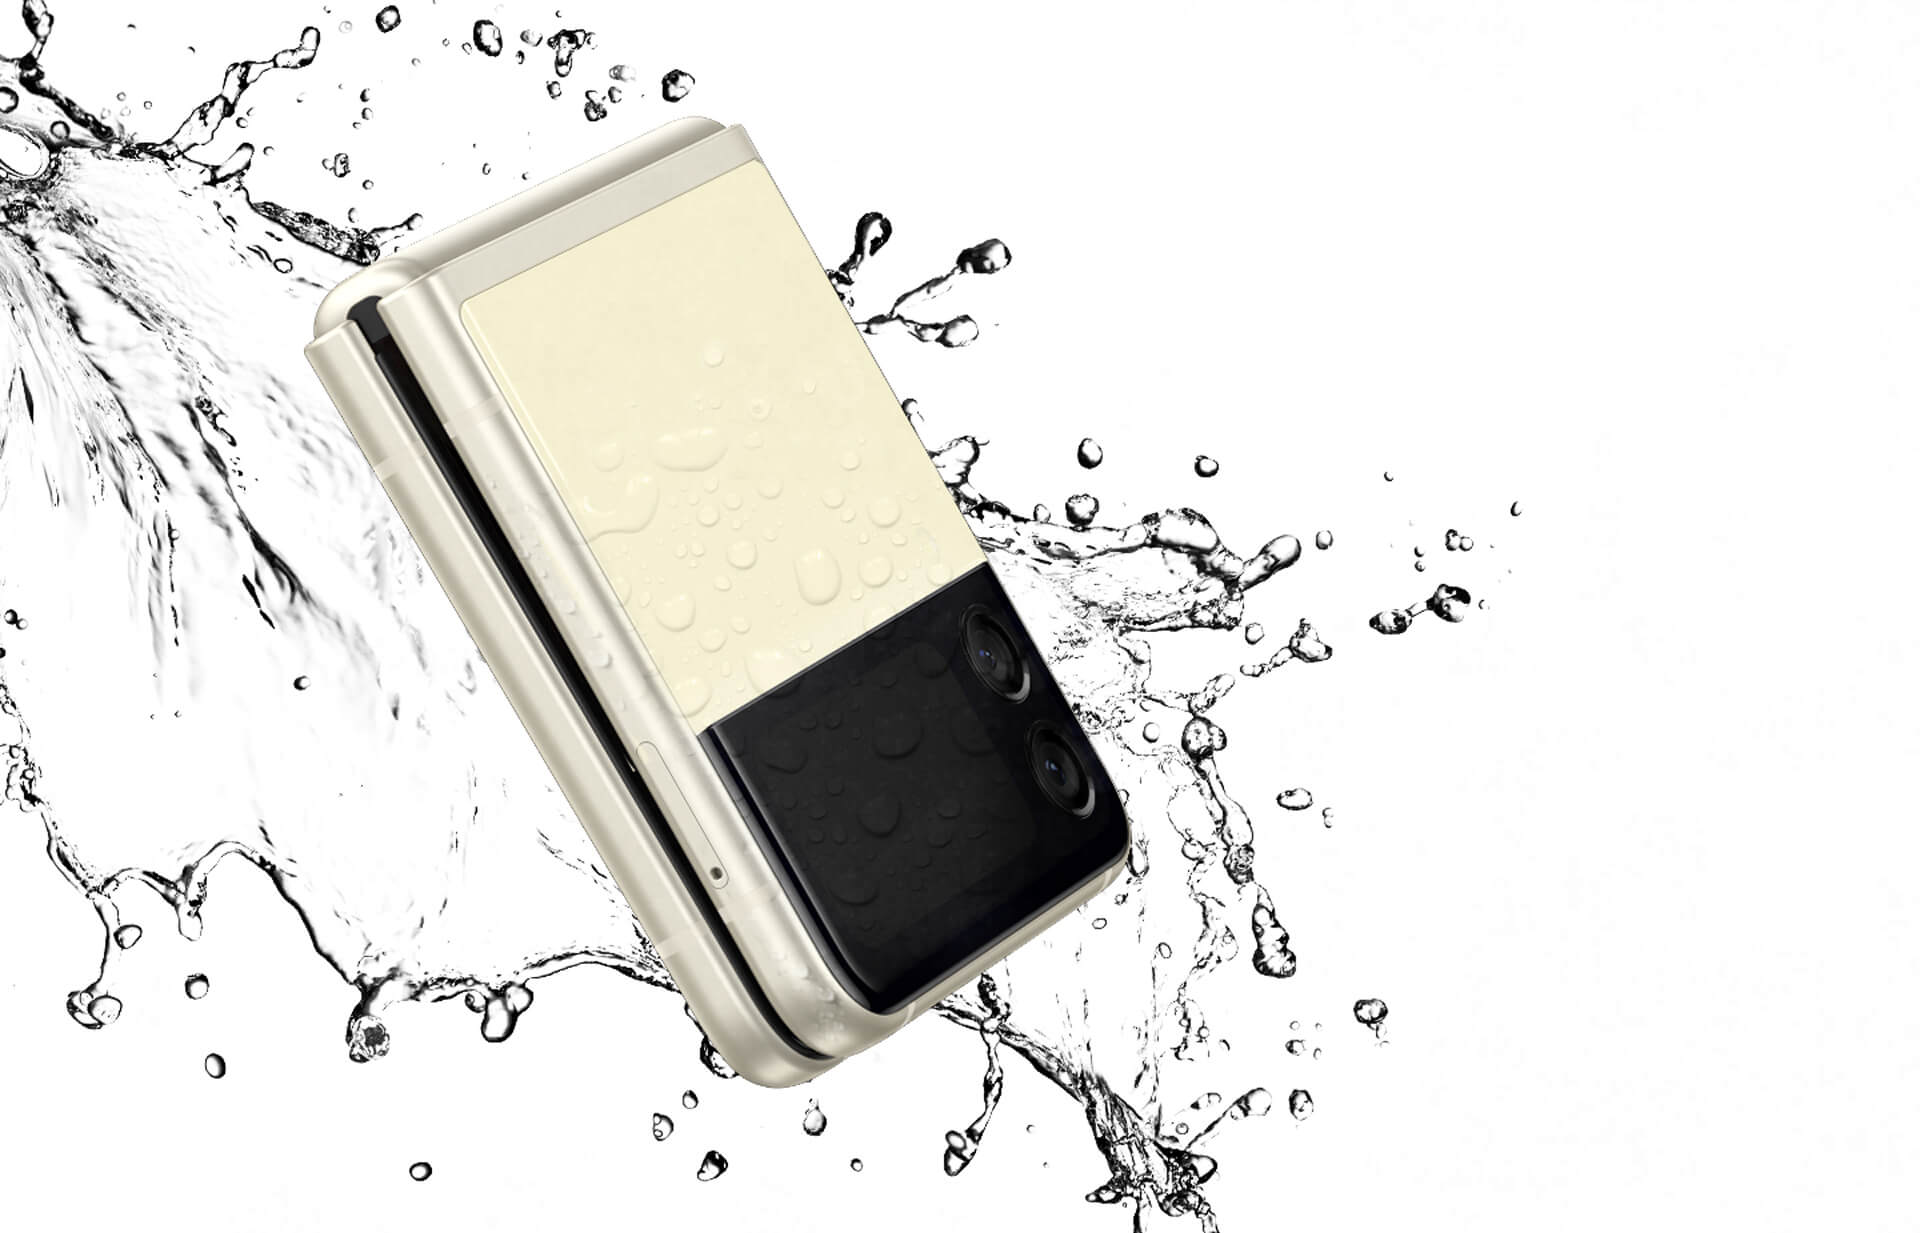 One of Samsung's first water resistant smartphones. The Galaxy Z Fold 3.